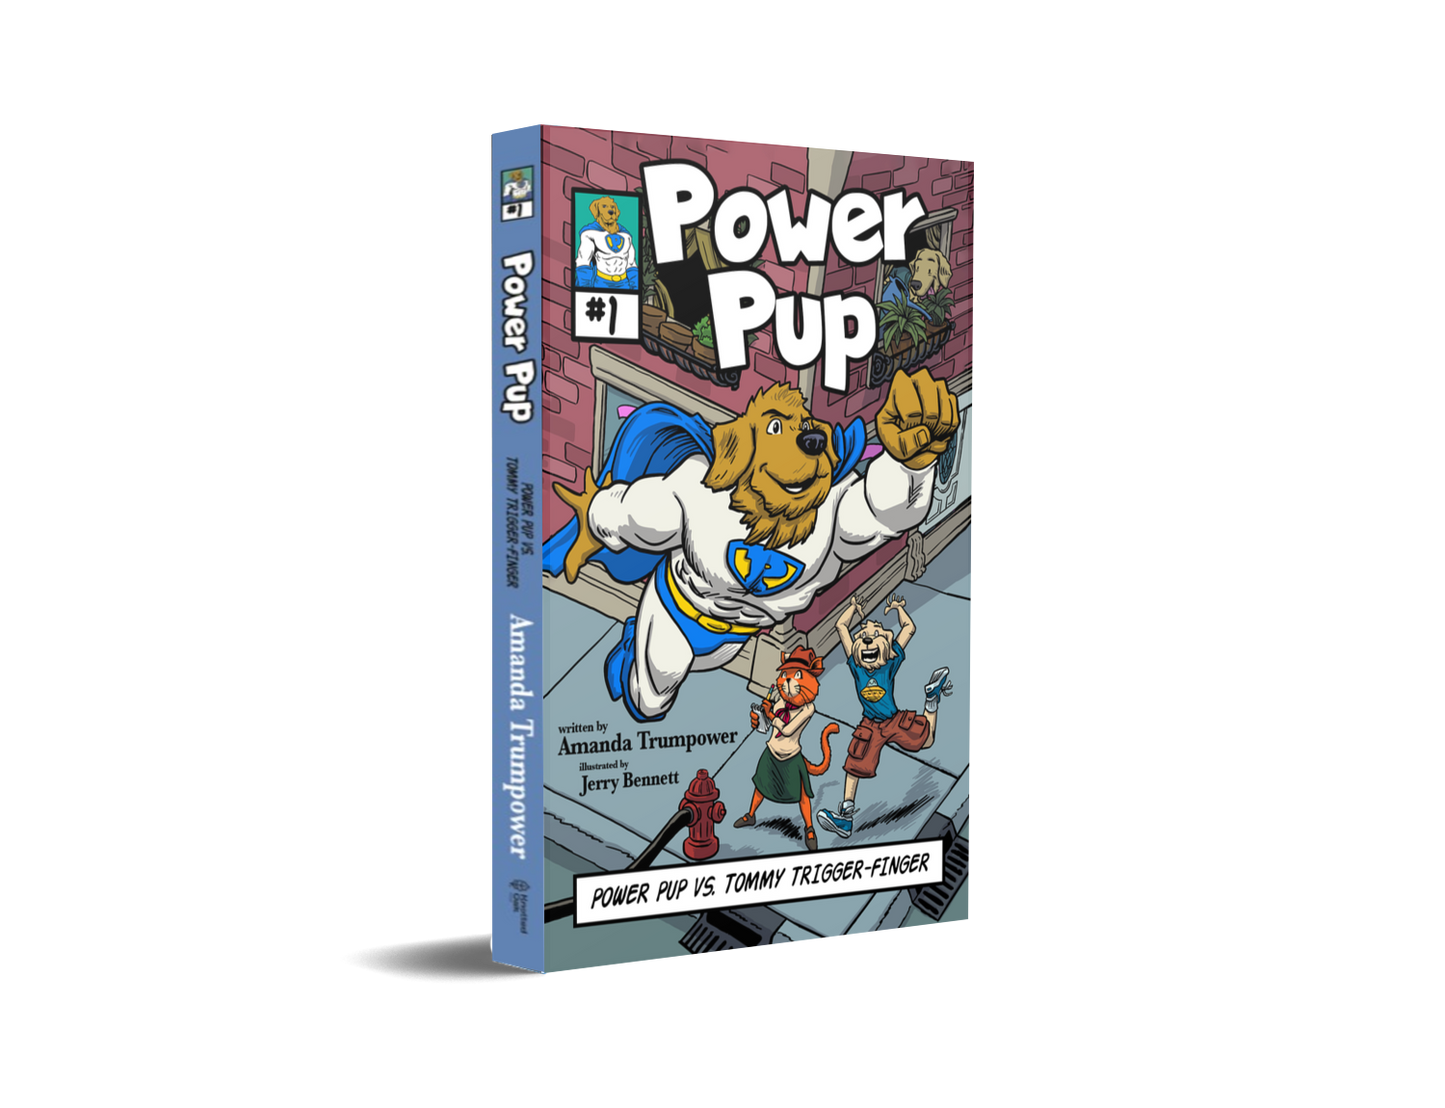 Power Pup #1: Power Pup vs. Tommy Trigger Finger